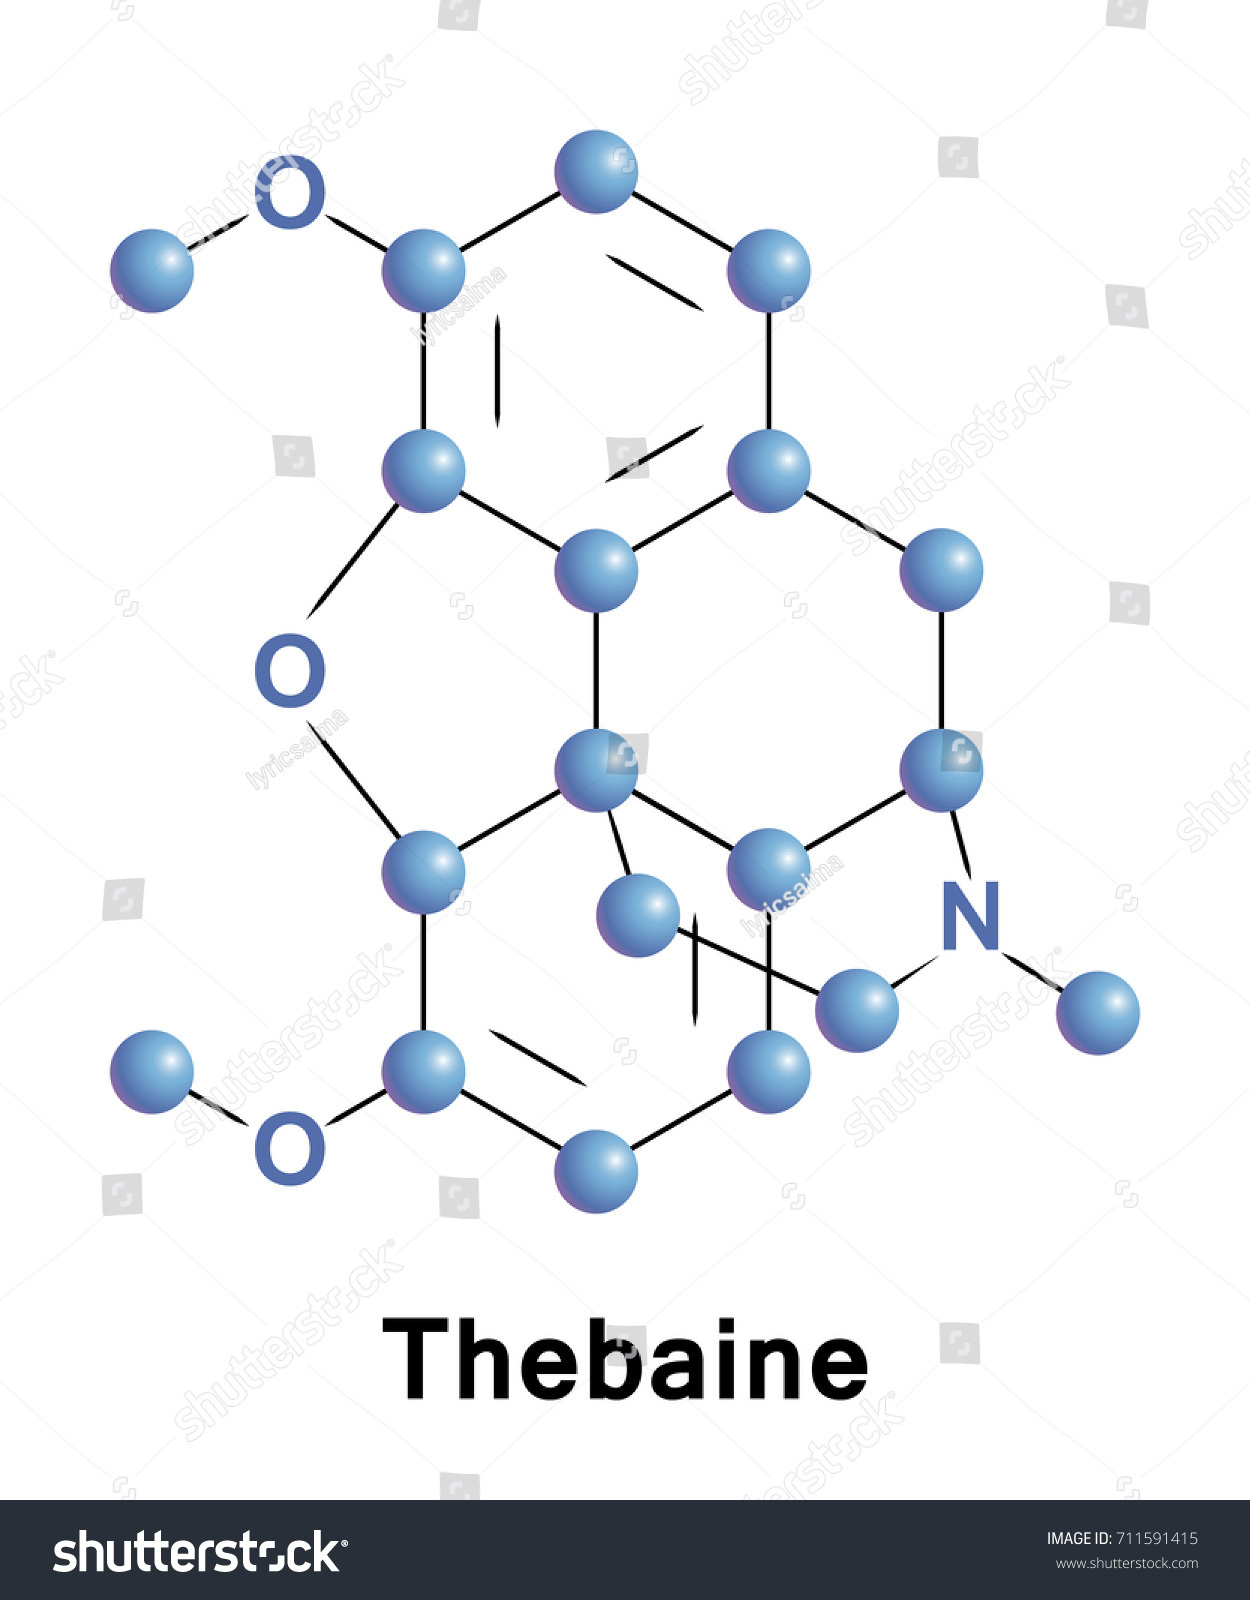 SVG of Thebaine, also known as codeine methyl enol ether, is an opiate alkaloid svg